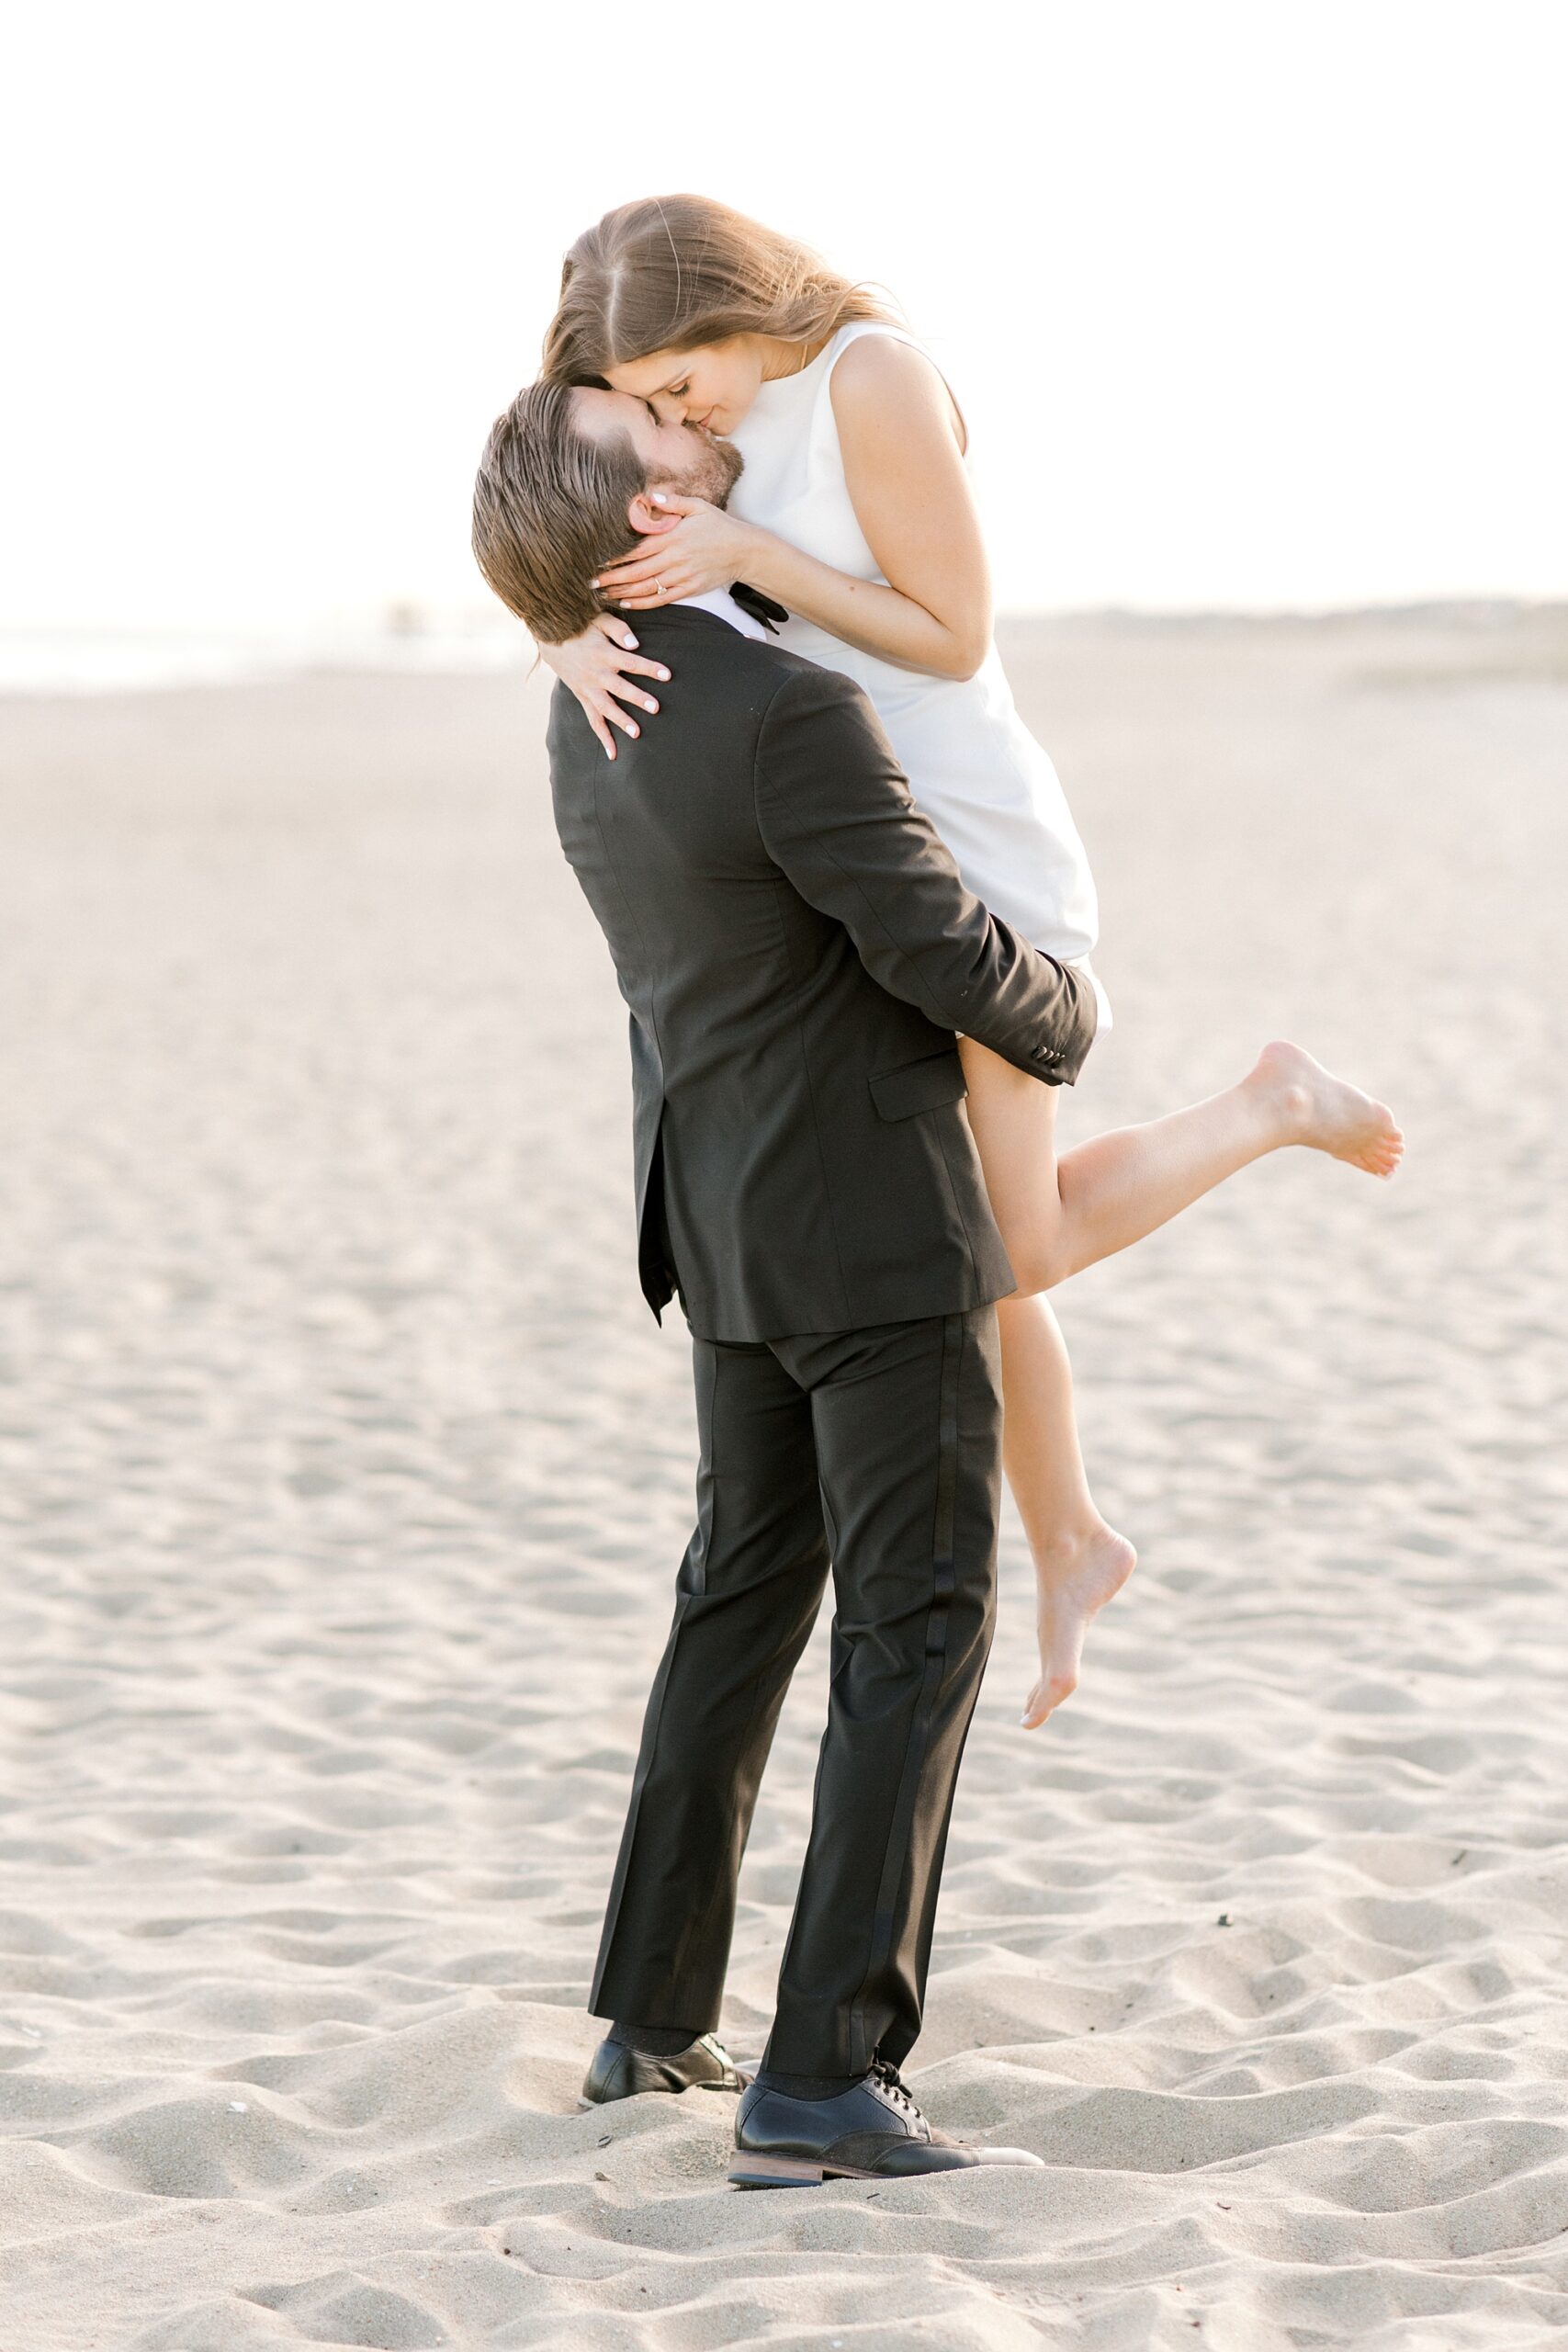 man lifts up bride on beach in Asbury Park